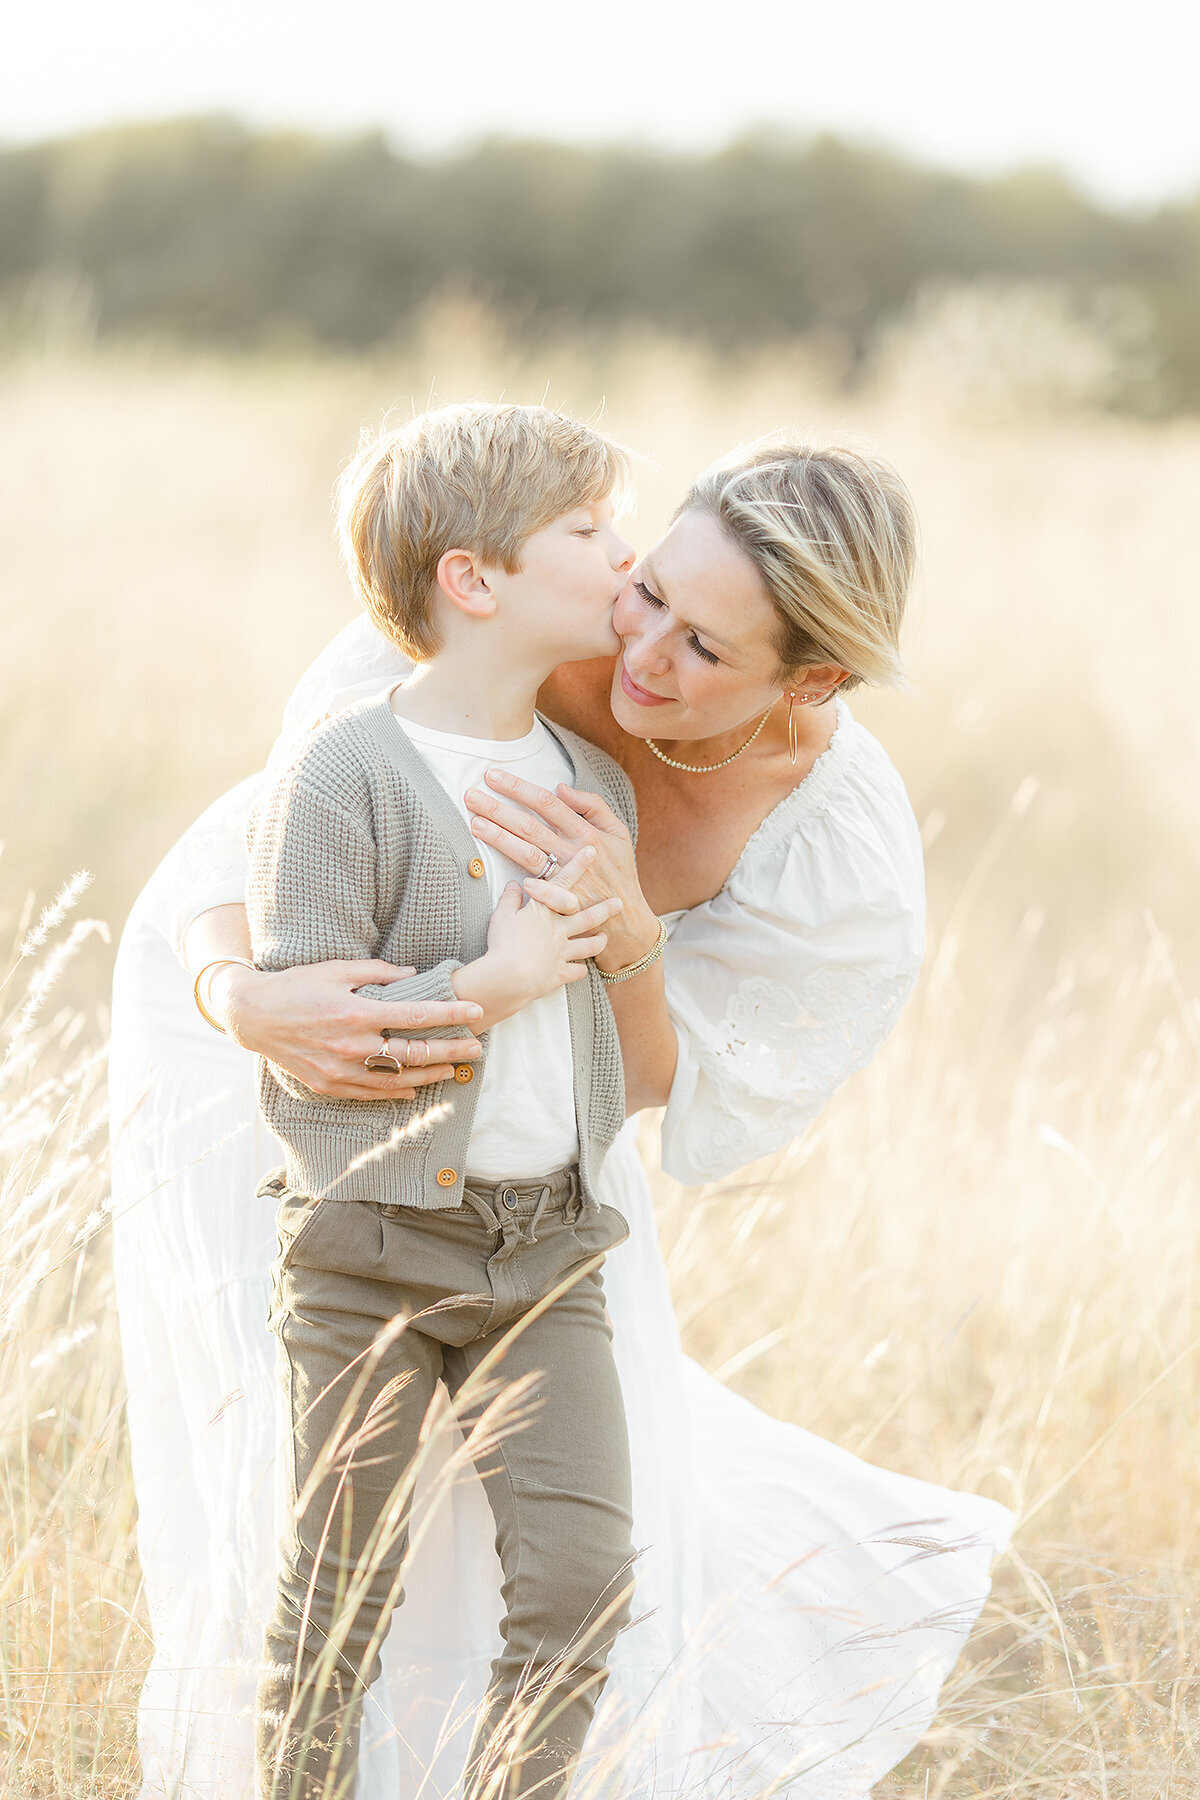 A photo of a mother and her young son standing in a Fort Worth TX park in the middle of a field. She is holding him close to her as he kisses her cheek.